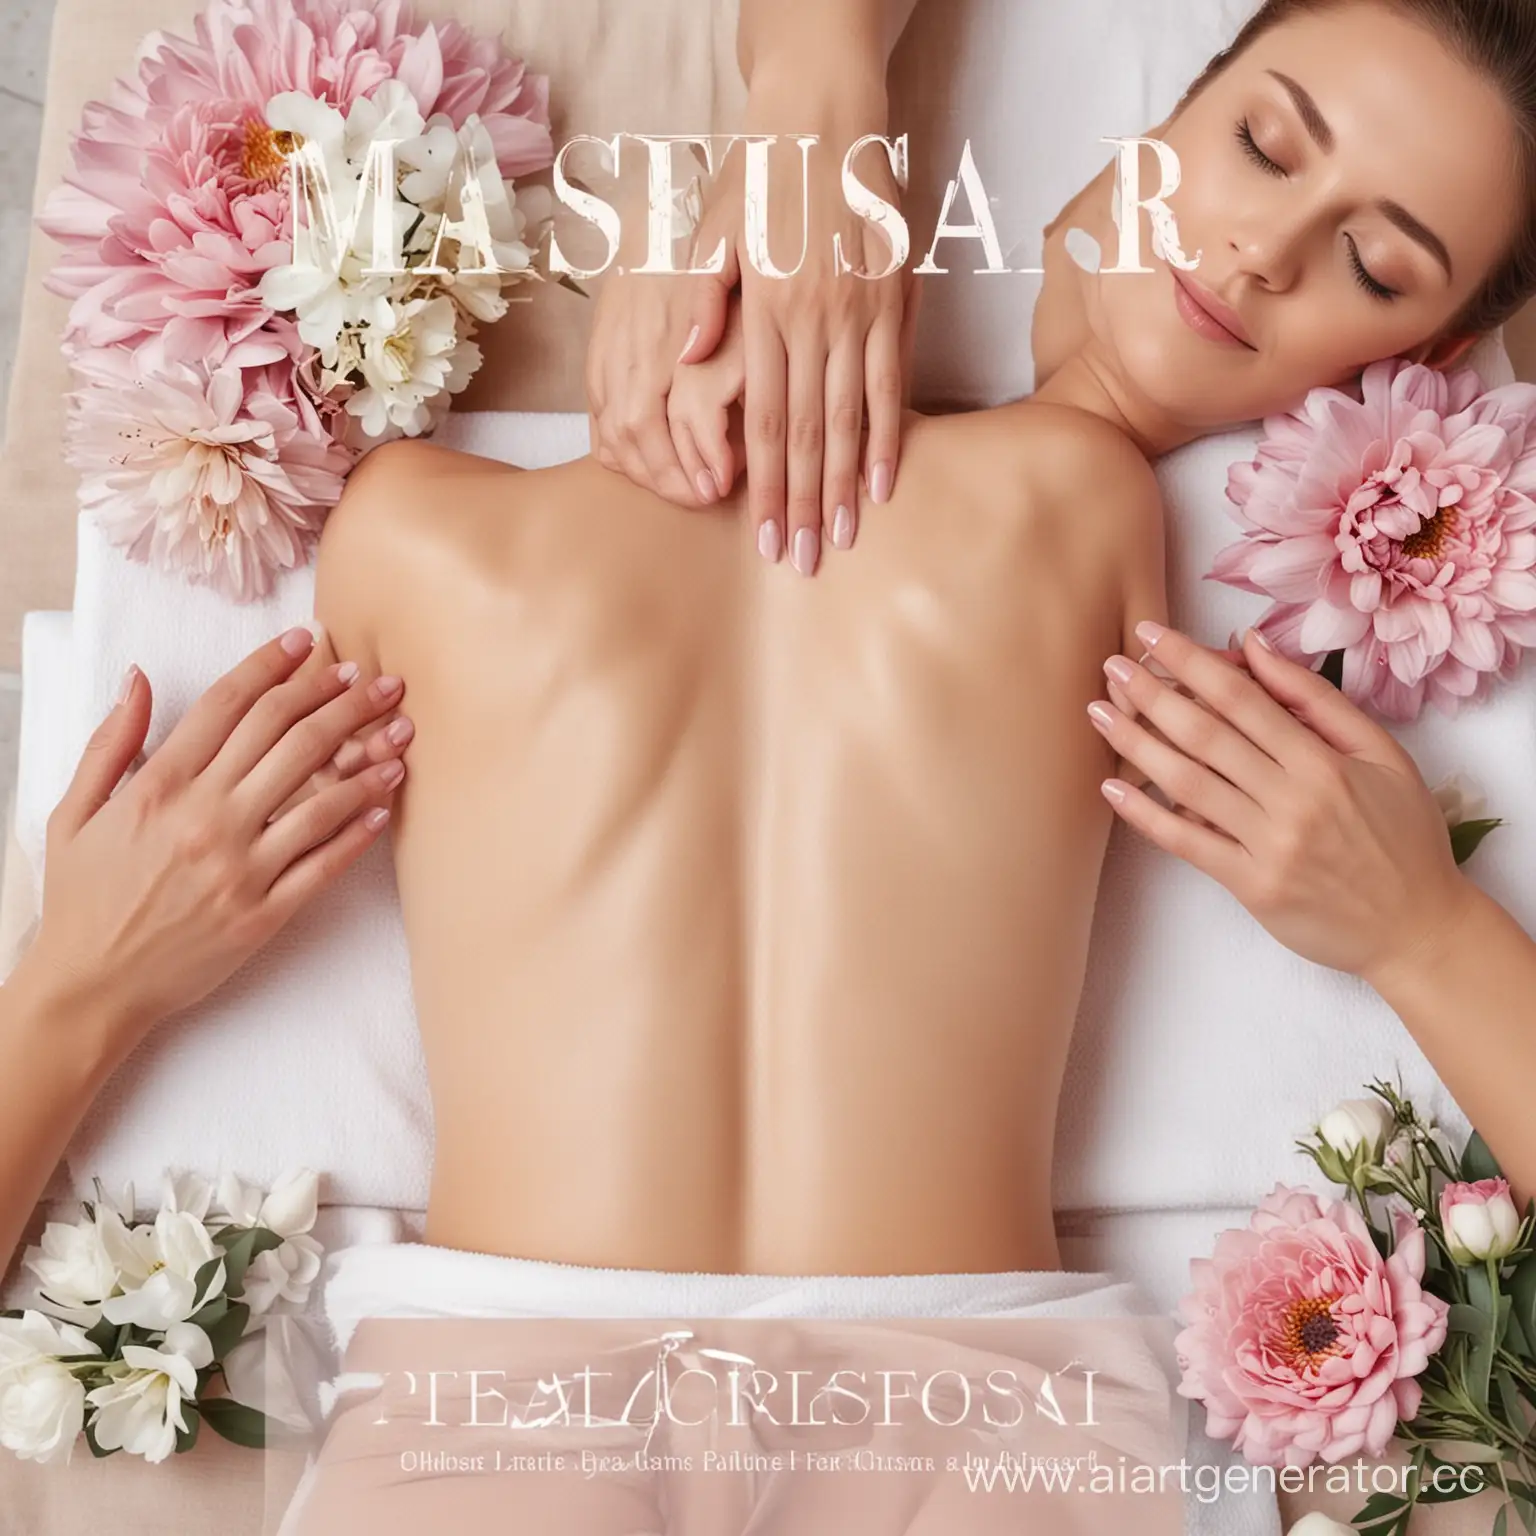 Professional-Masseur-Giving-Back-Massage-Surrounded-by-Beautiful-Flowers